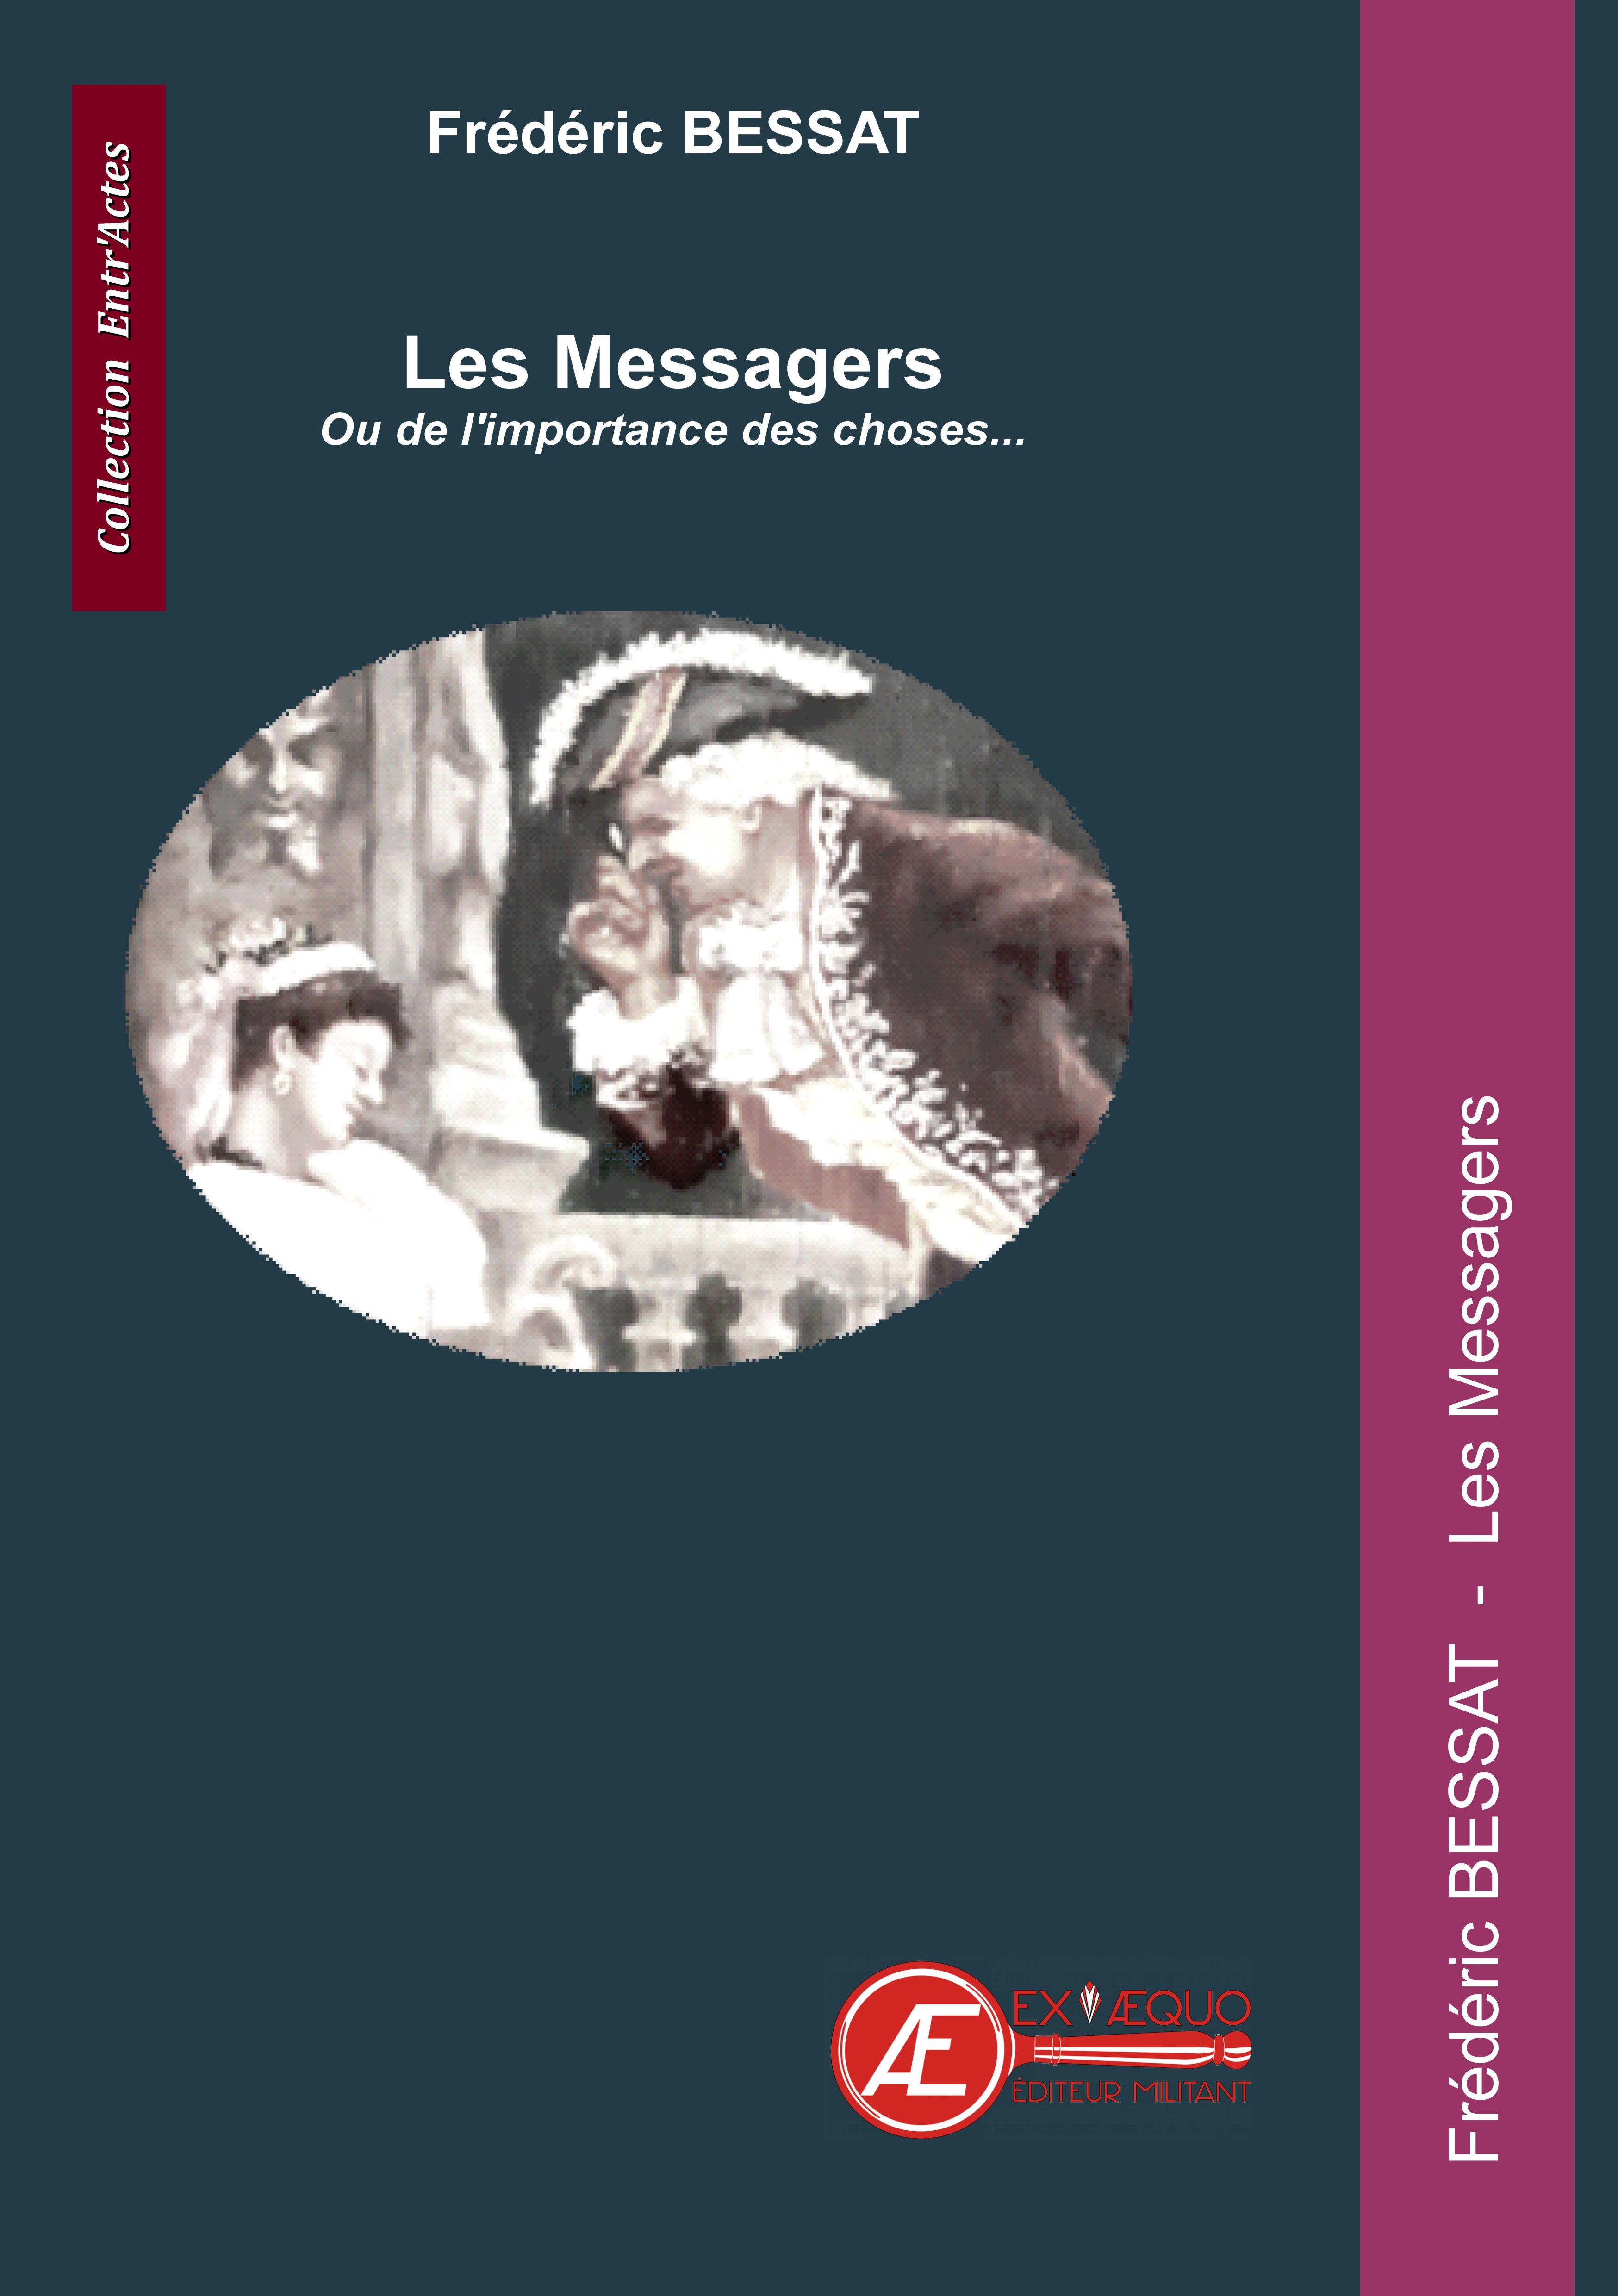 You are currently viewing Les messagers, de Frédéric Bessat